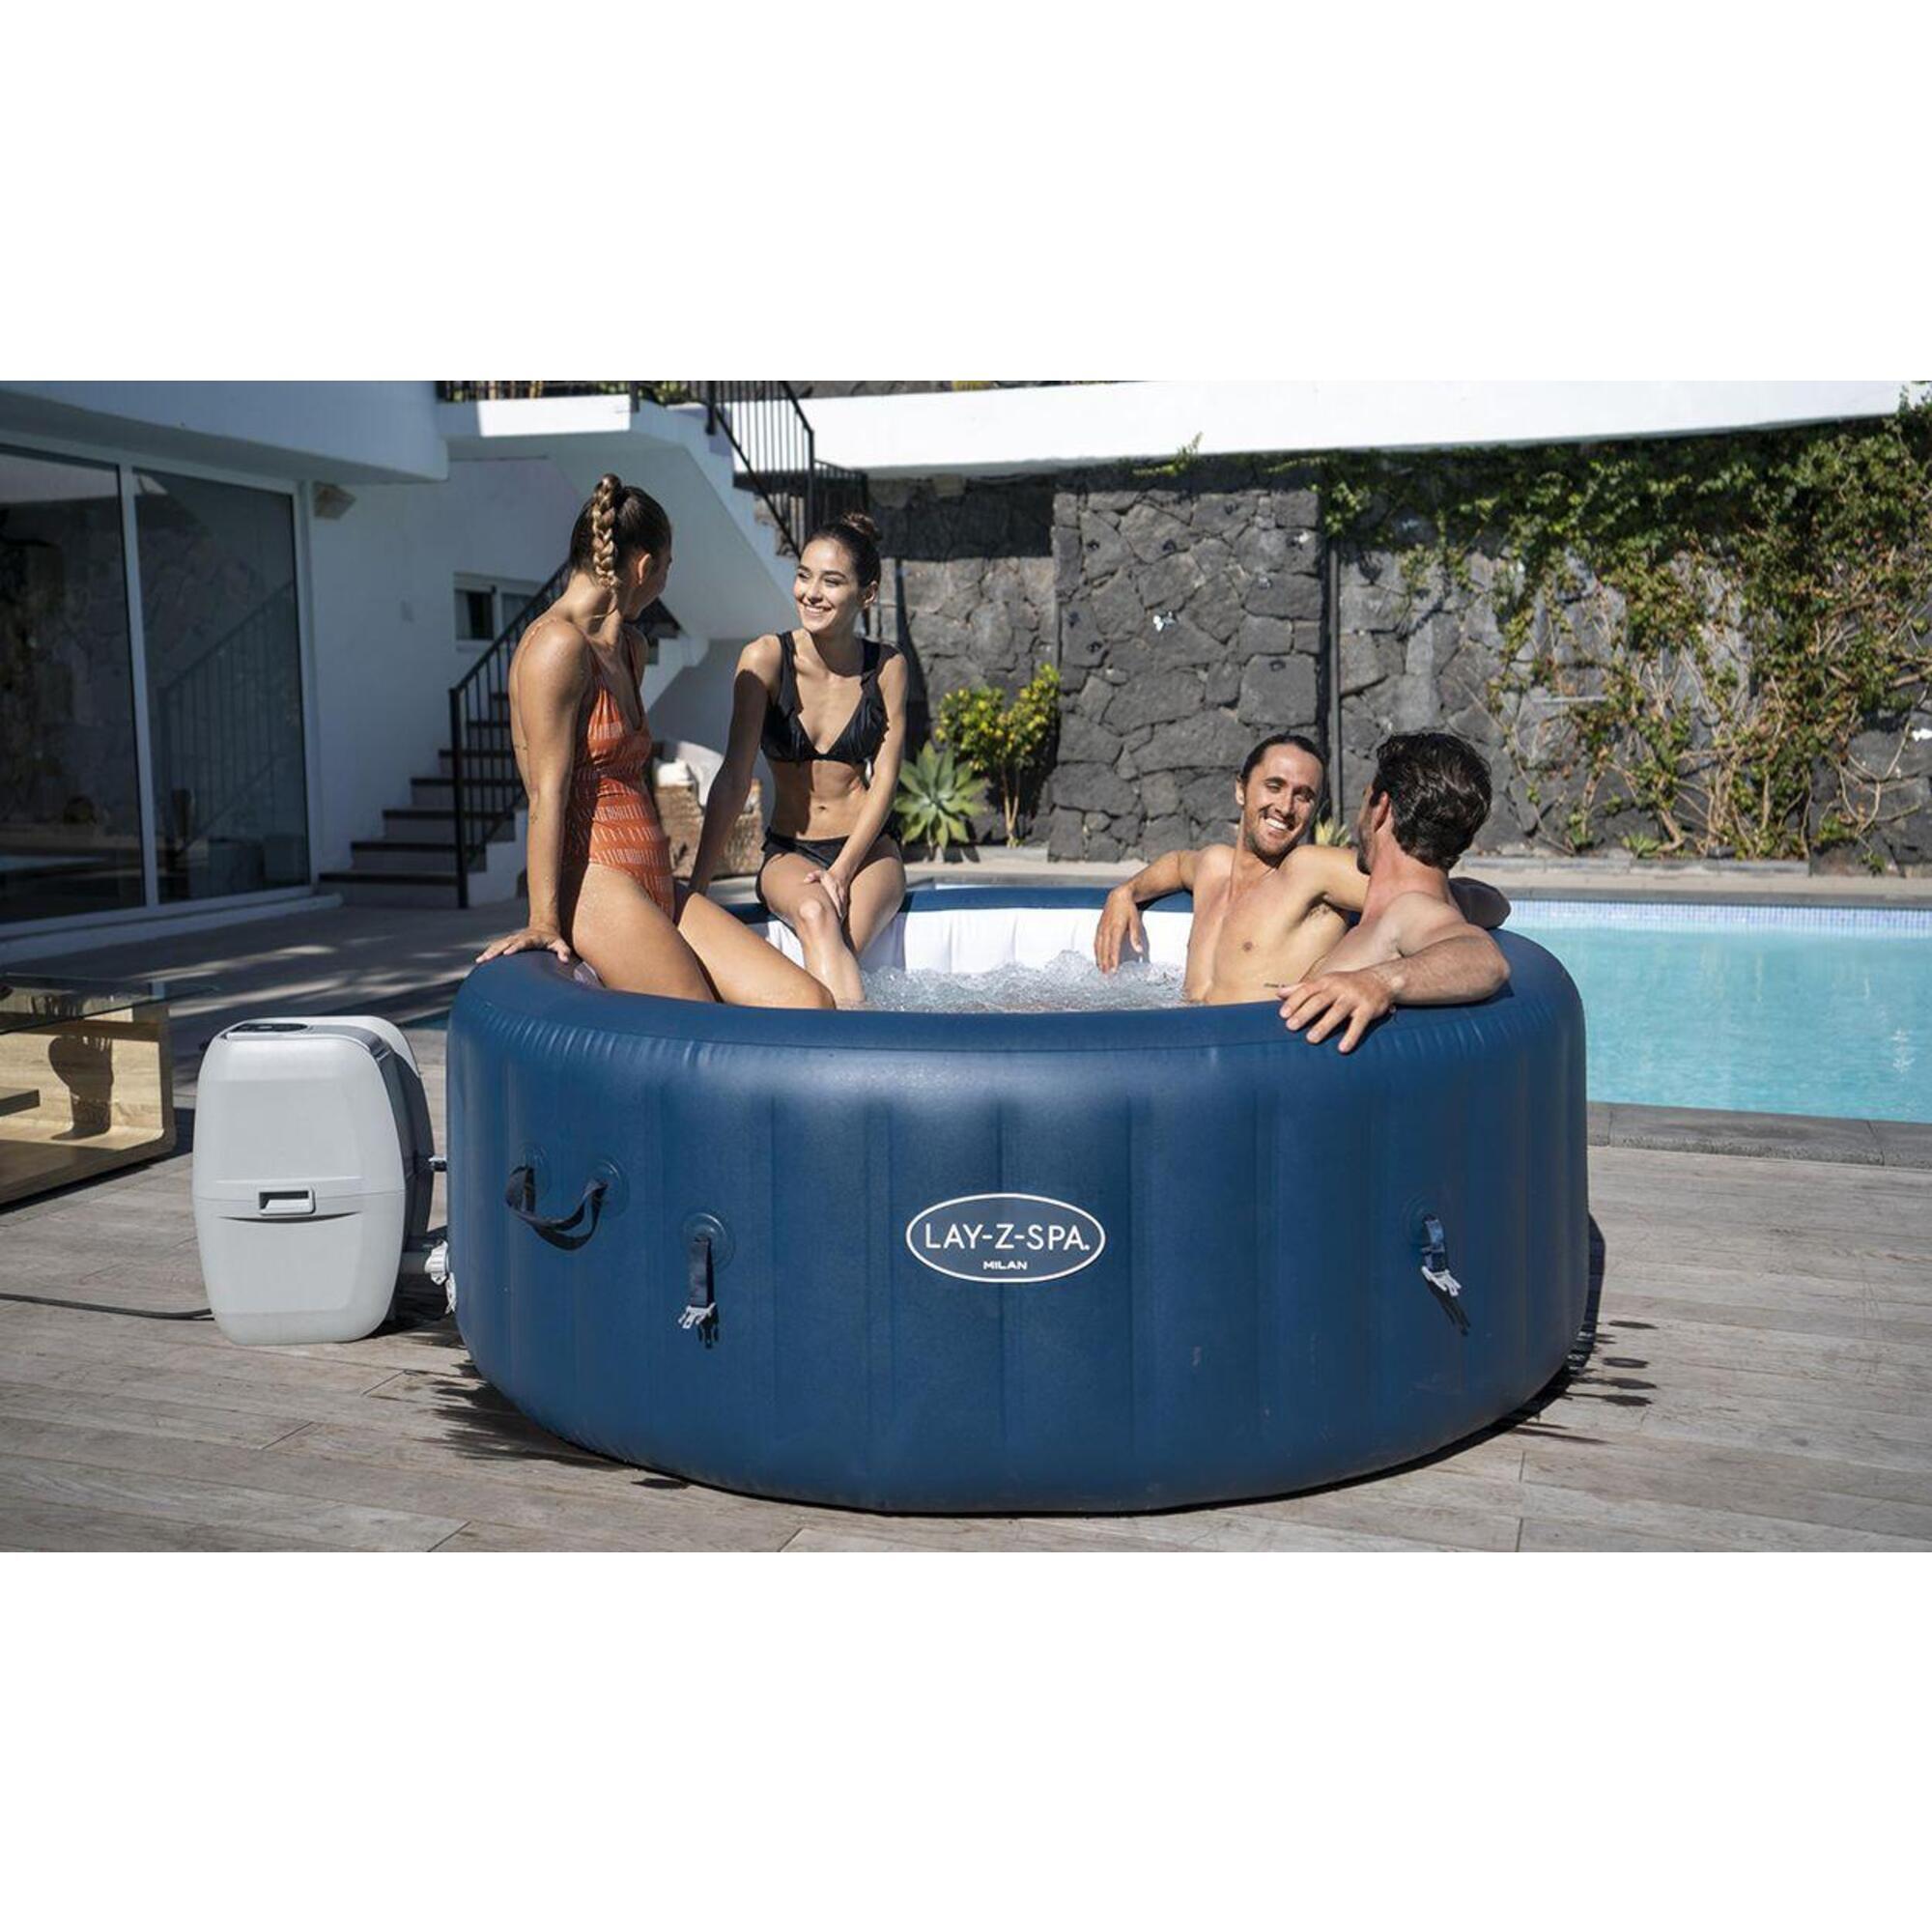 Lay-Z-Spa Milan Airjet PLUS Inflatable Hot Tub 2/5